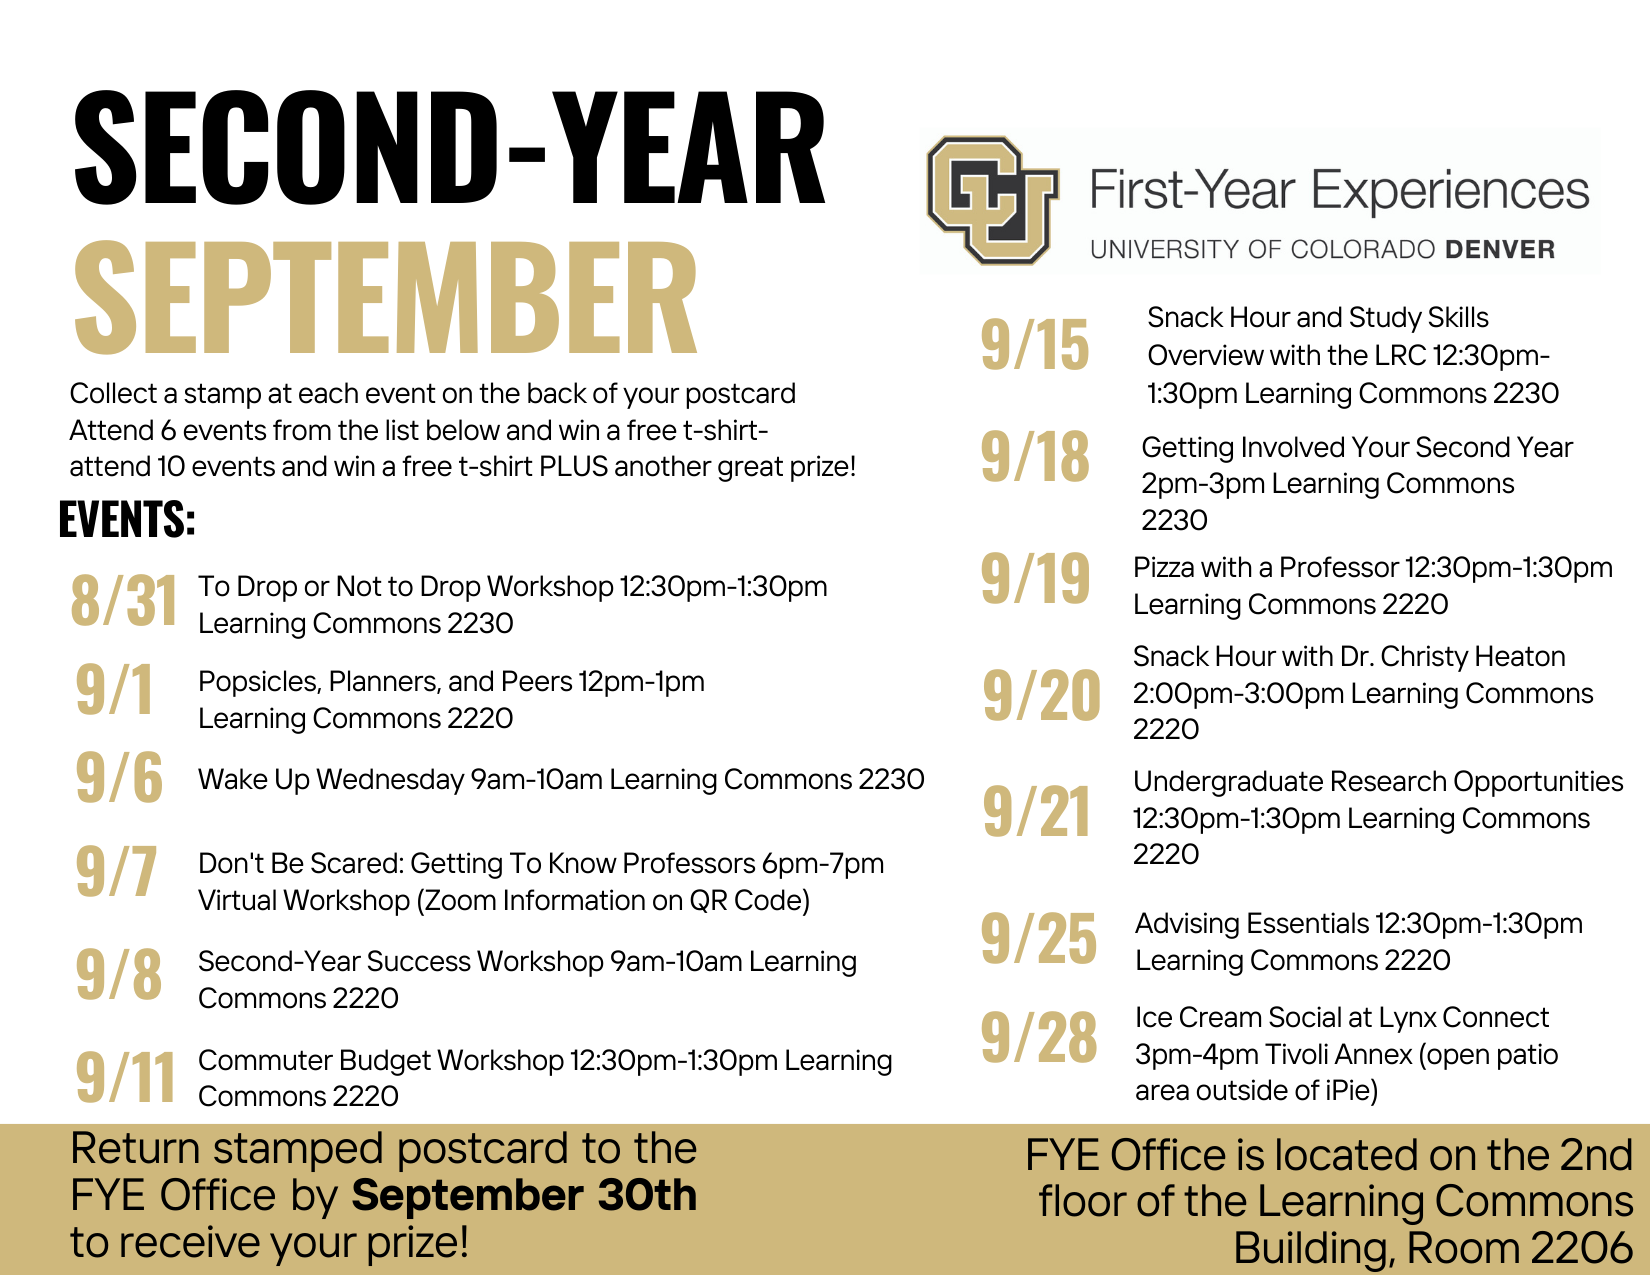 A list of events occurring in September